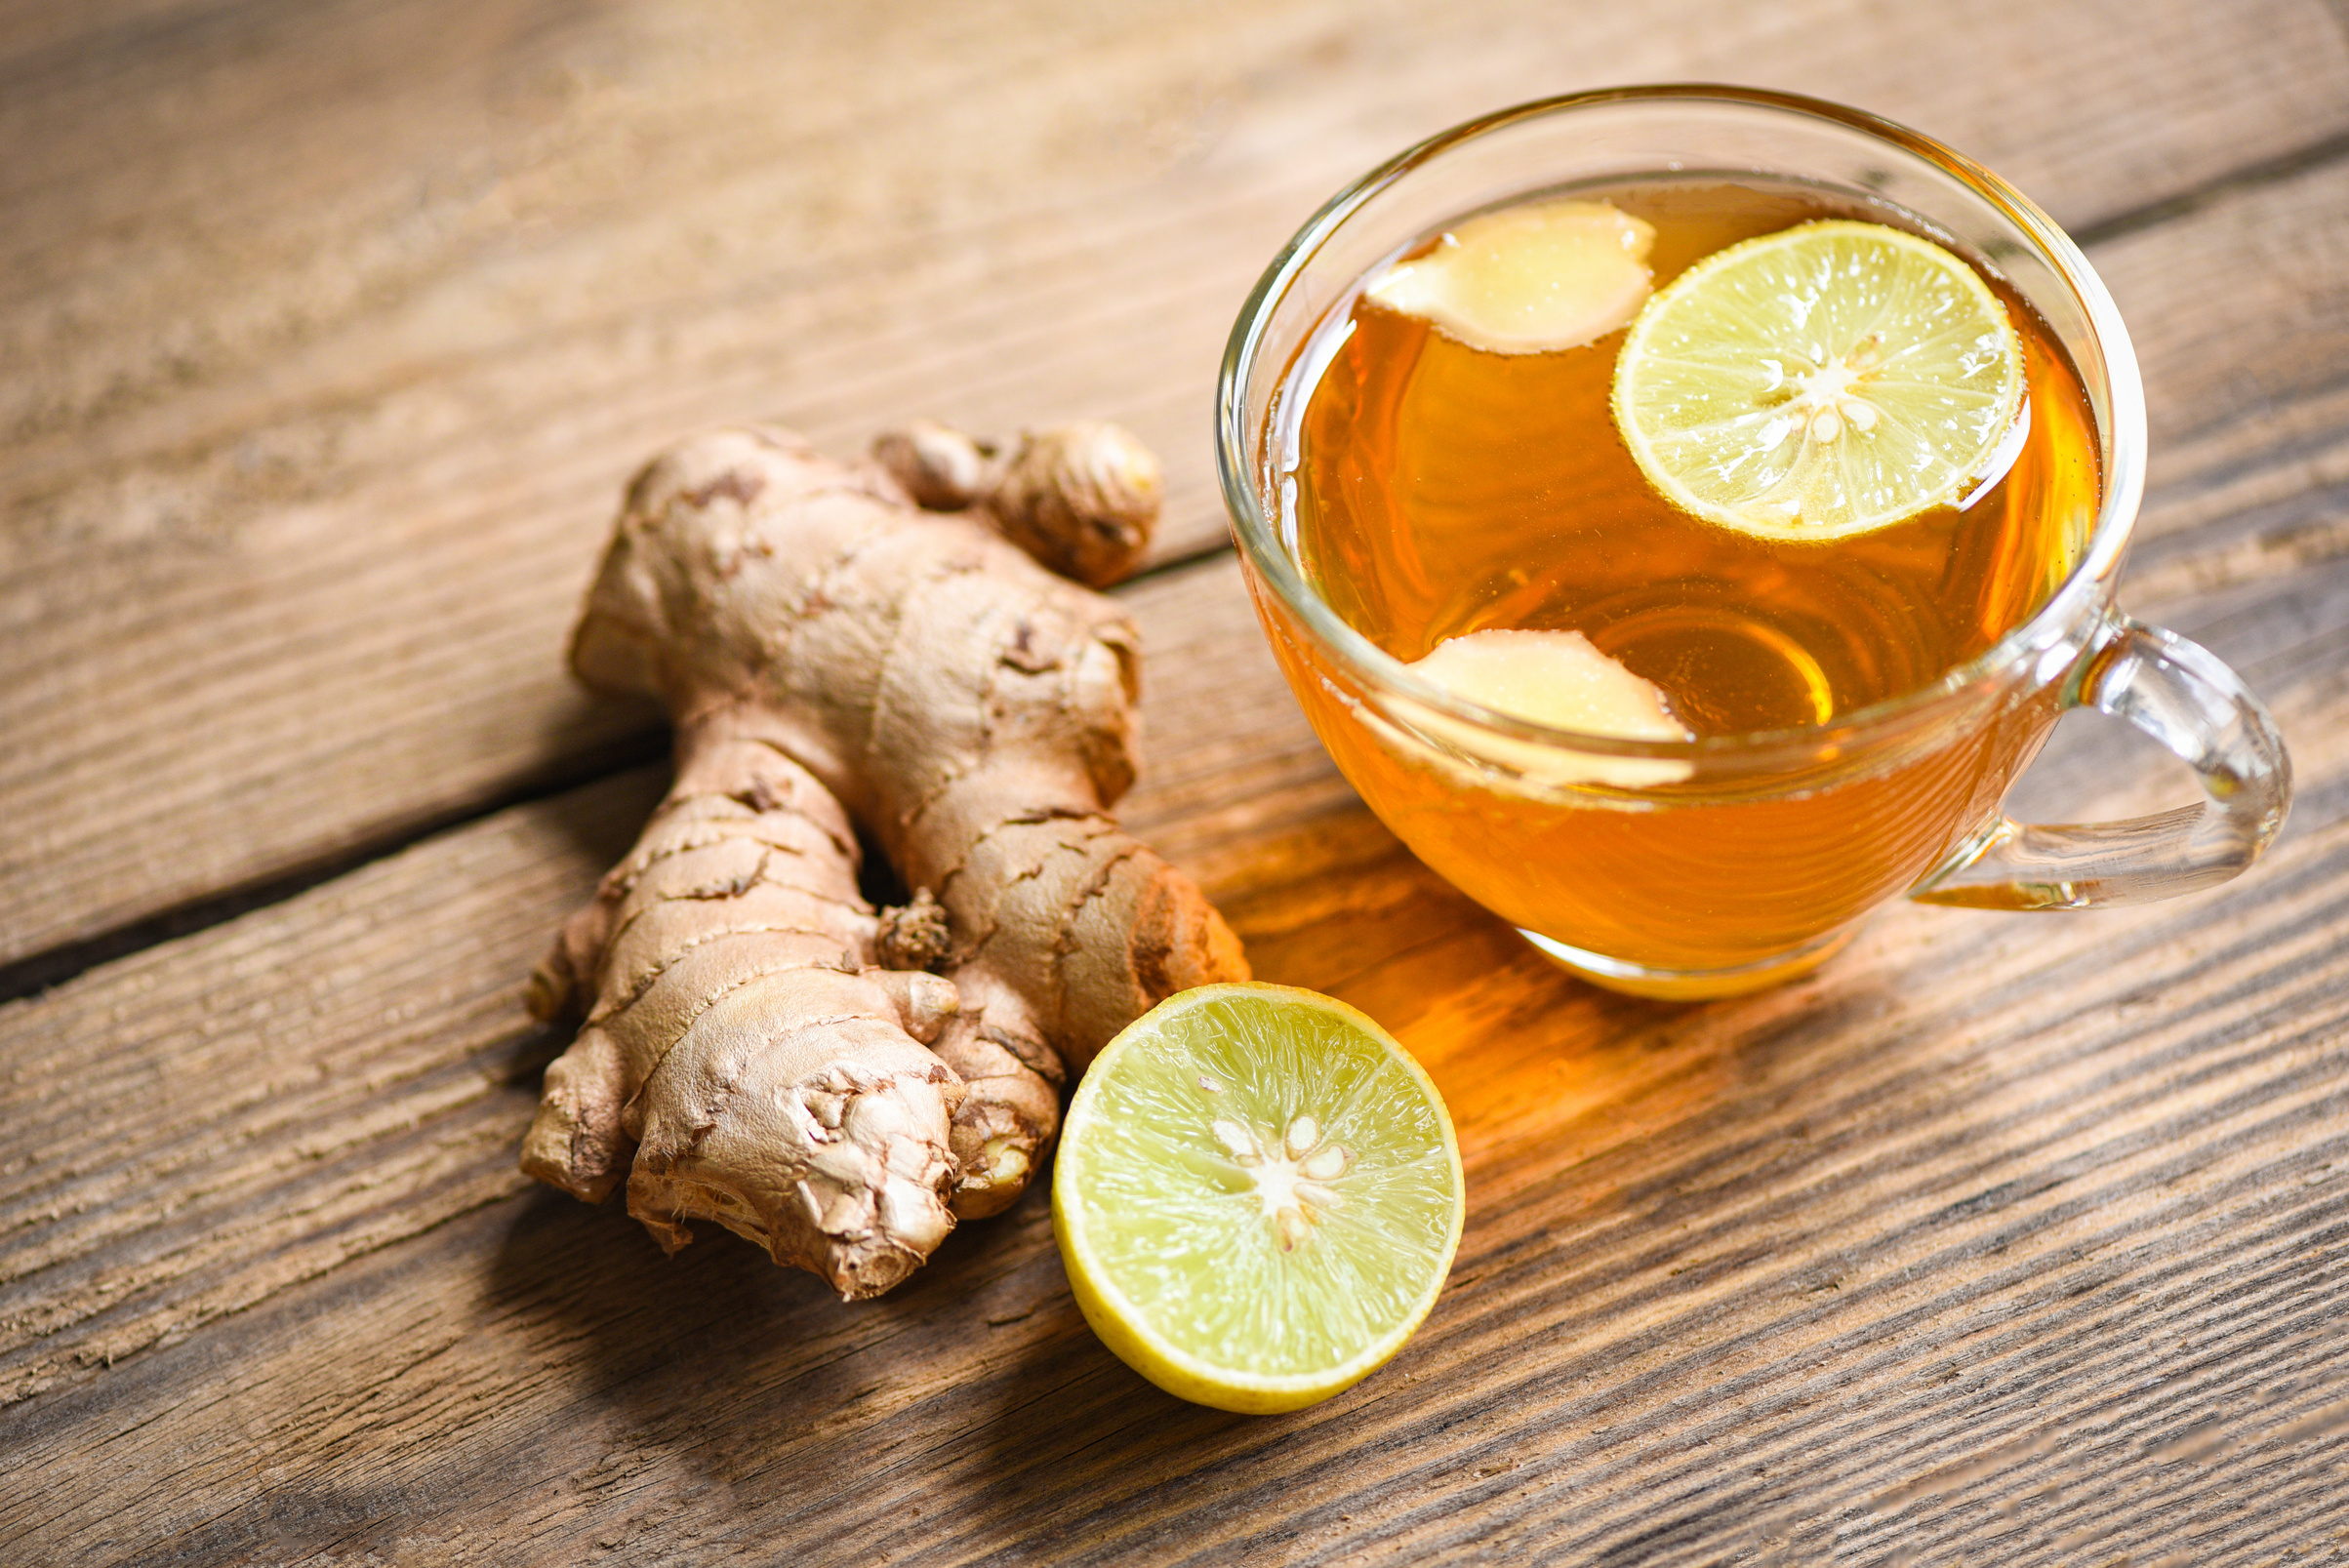 Cup of Ginger Tea with Lemon